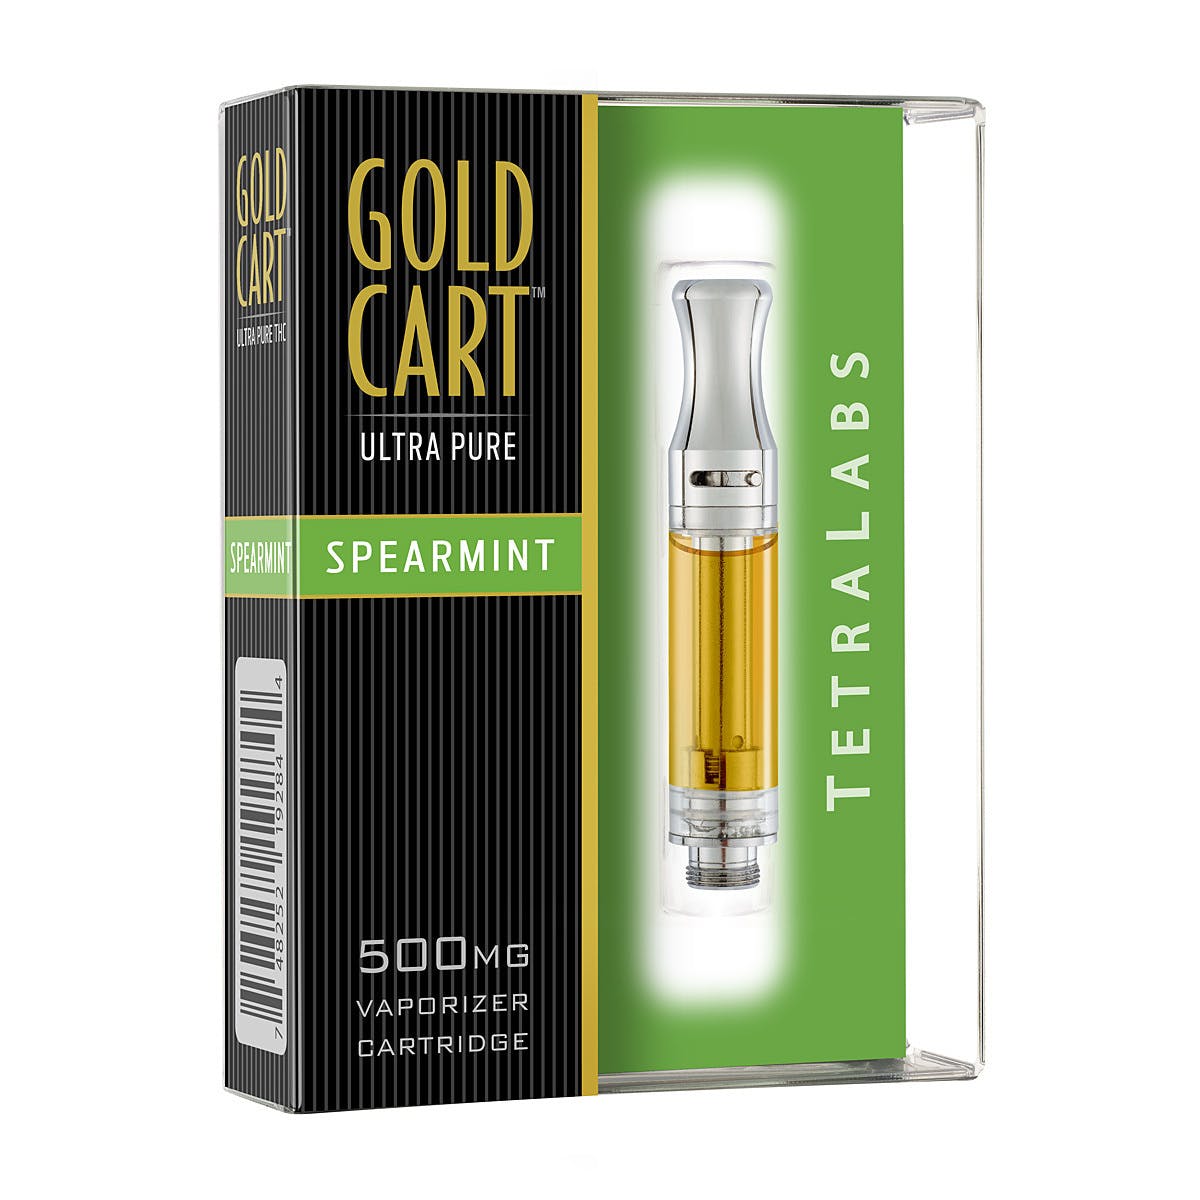 concentrate-ultra-pure-thc-cart-spearmint-2c-500mg